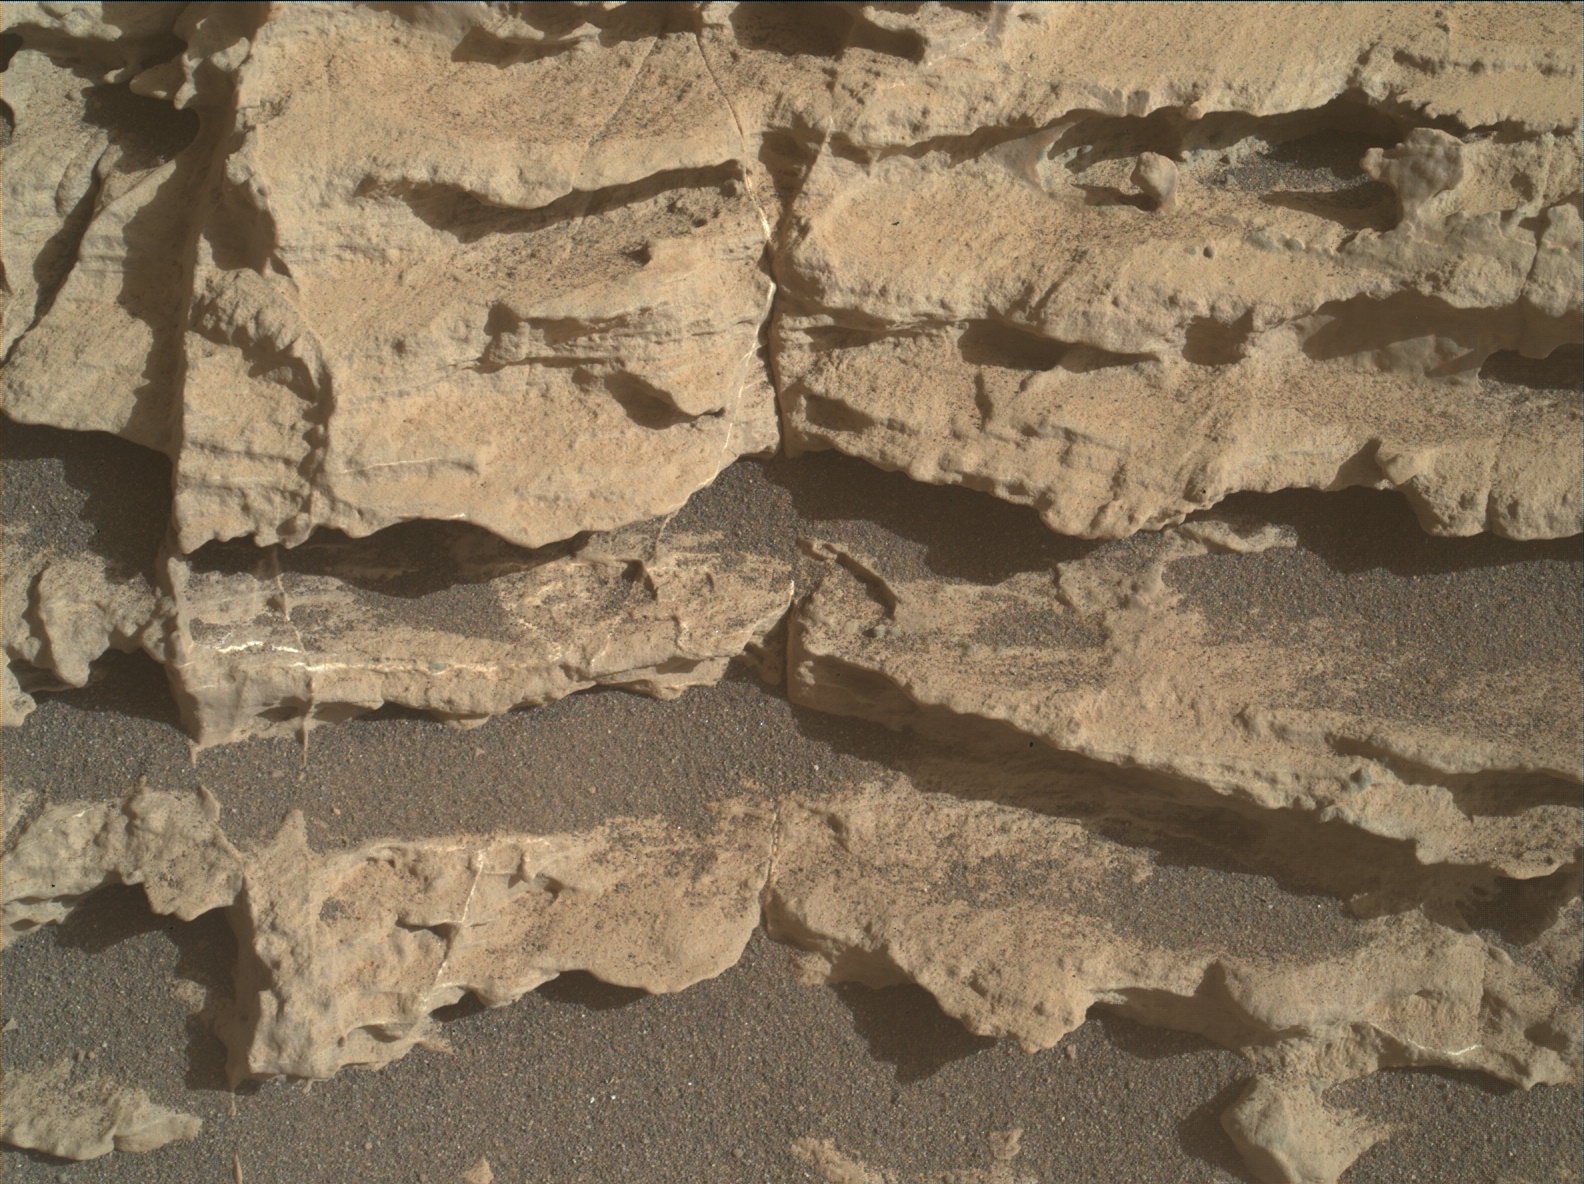 Nasa's Mars rover Curiosity acquired this image using its Mars Hand Lens Imager (MAHLI) on Sol 2575